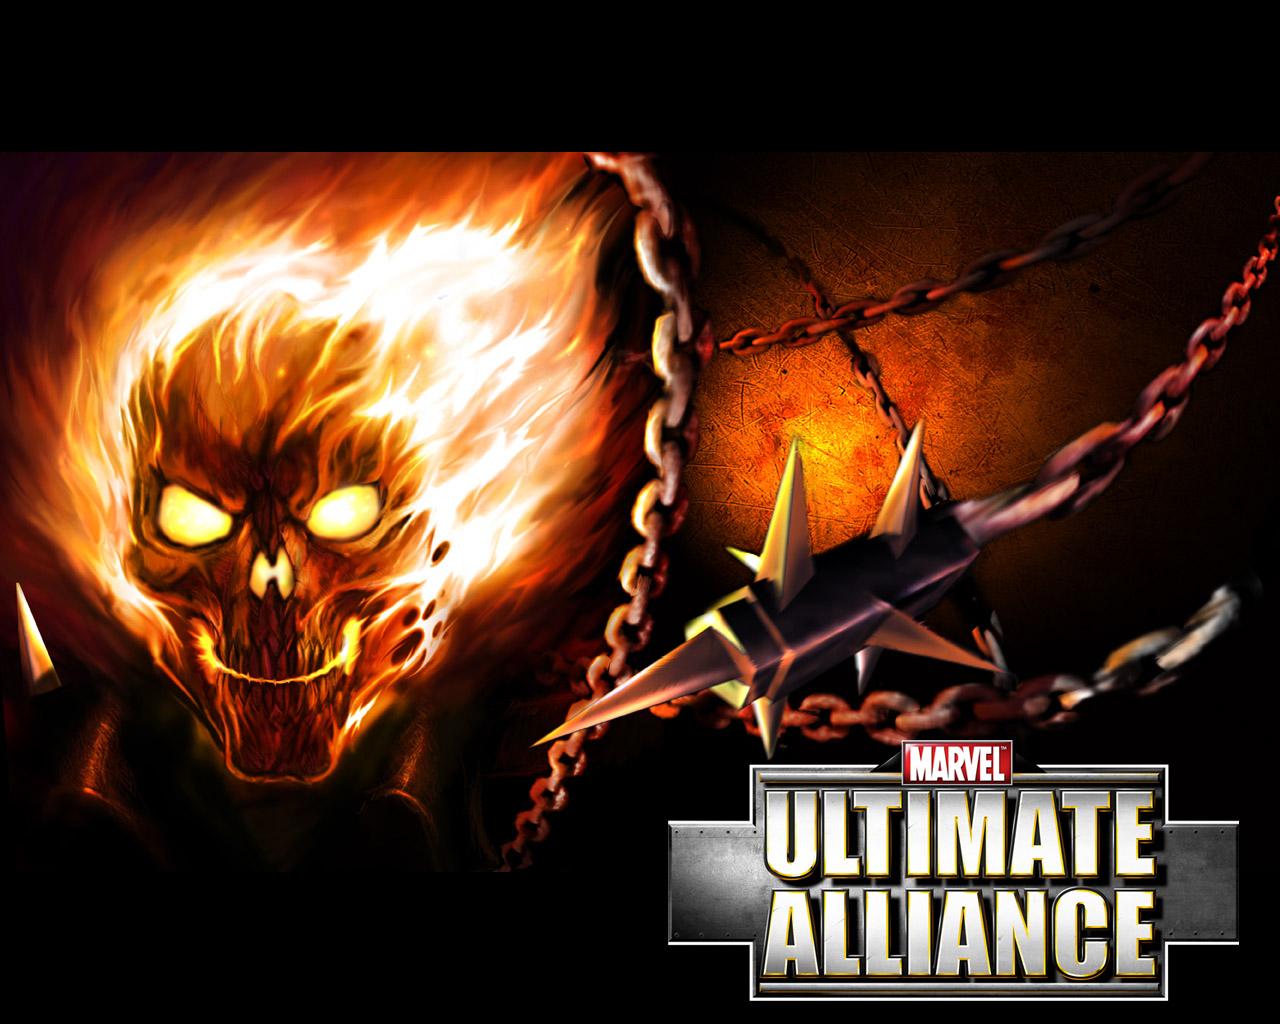 You are viewing the Ghost Rider wallpaper named